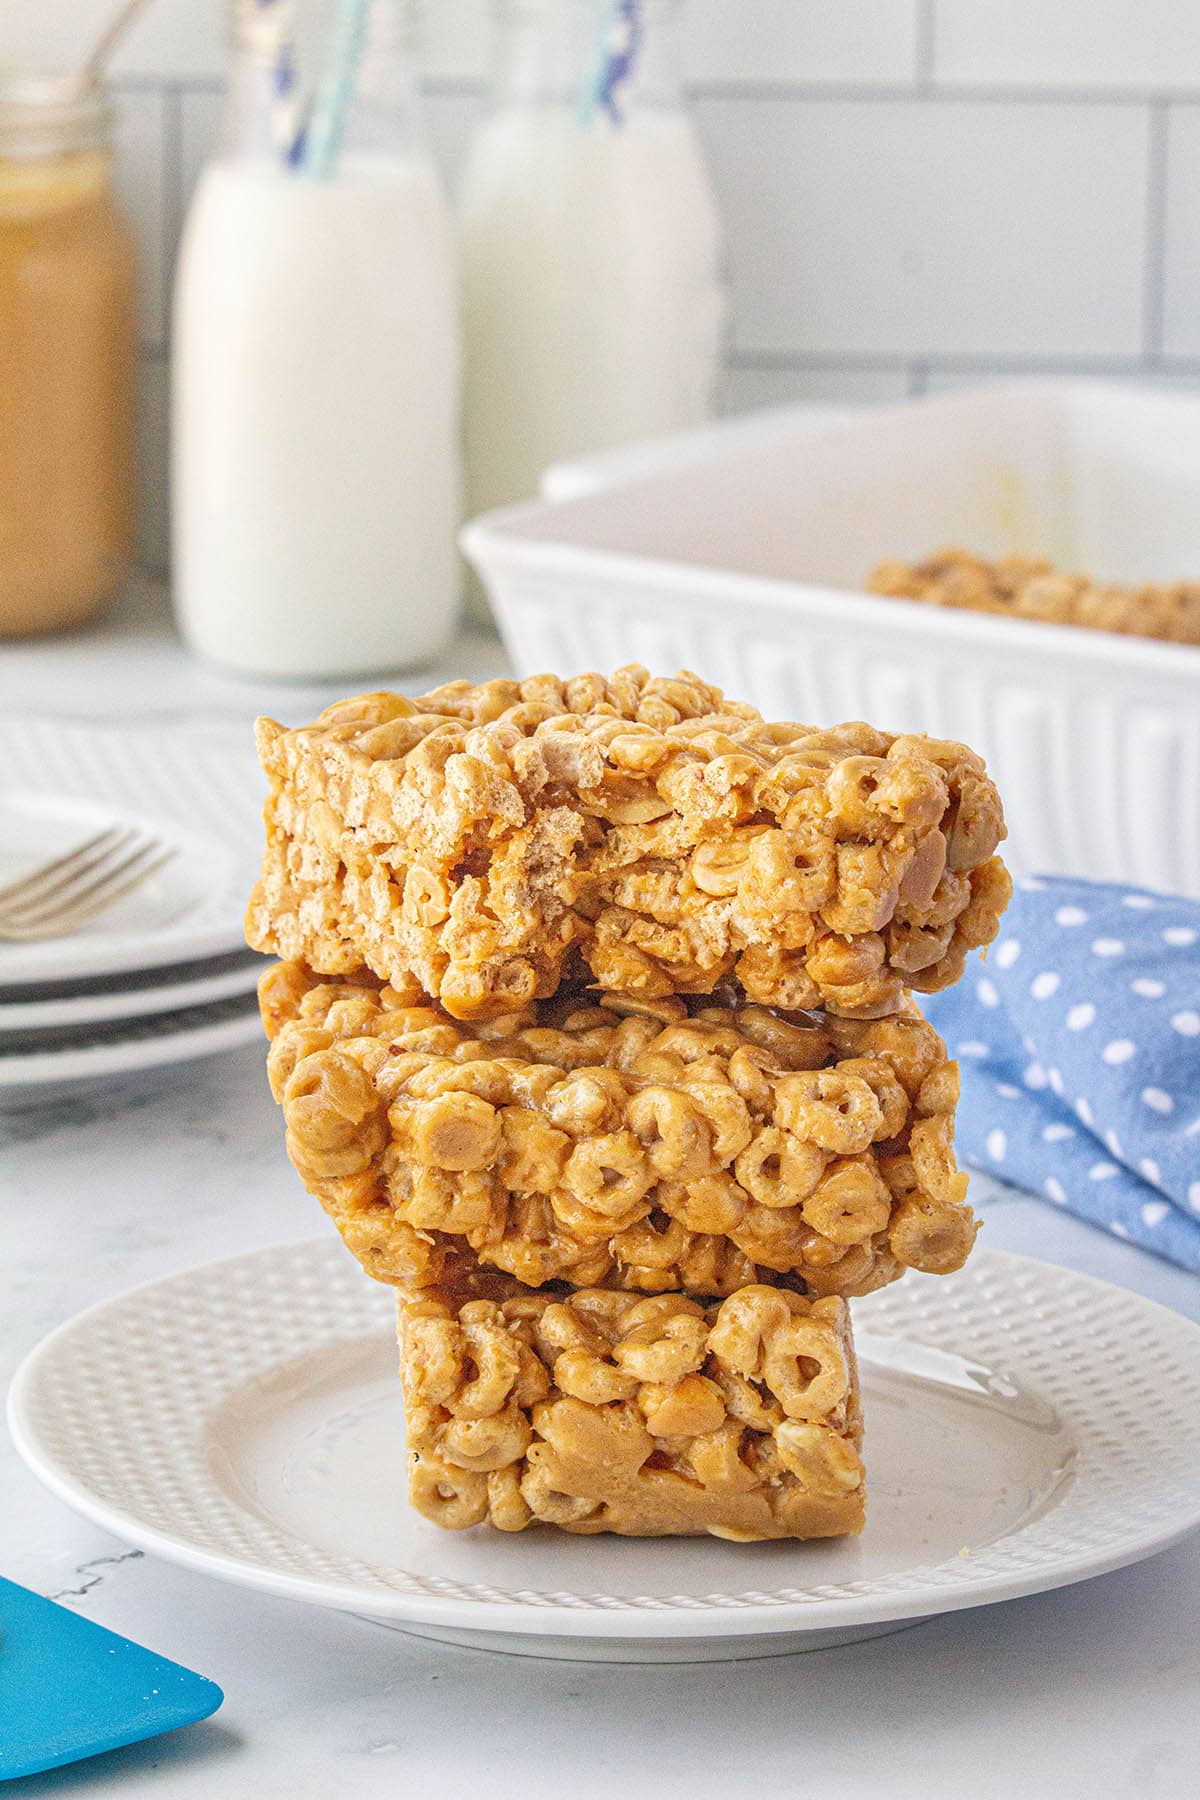 A stack of Cheerio Peanut Butter Bars on a plate.